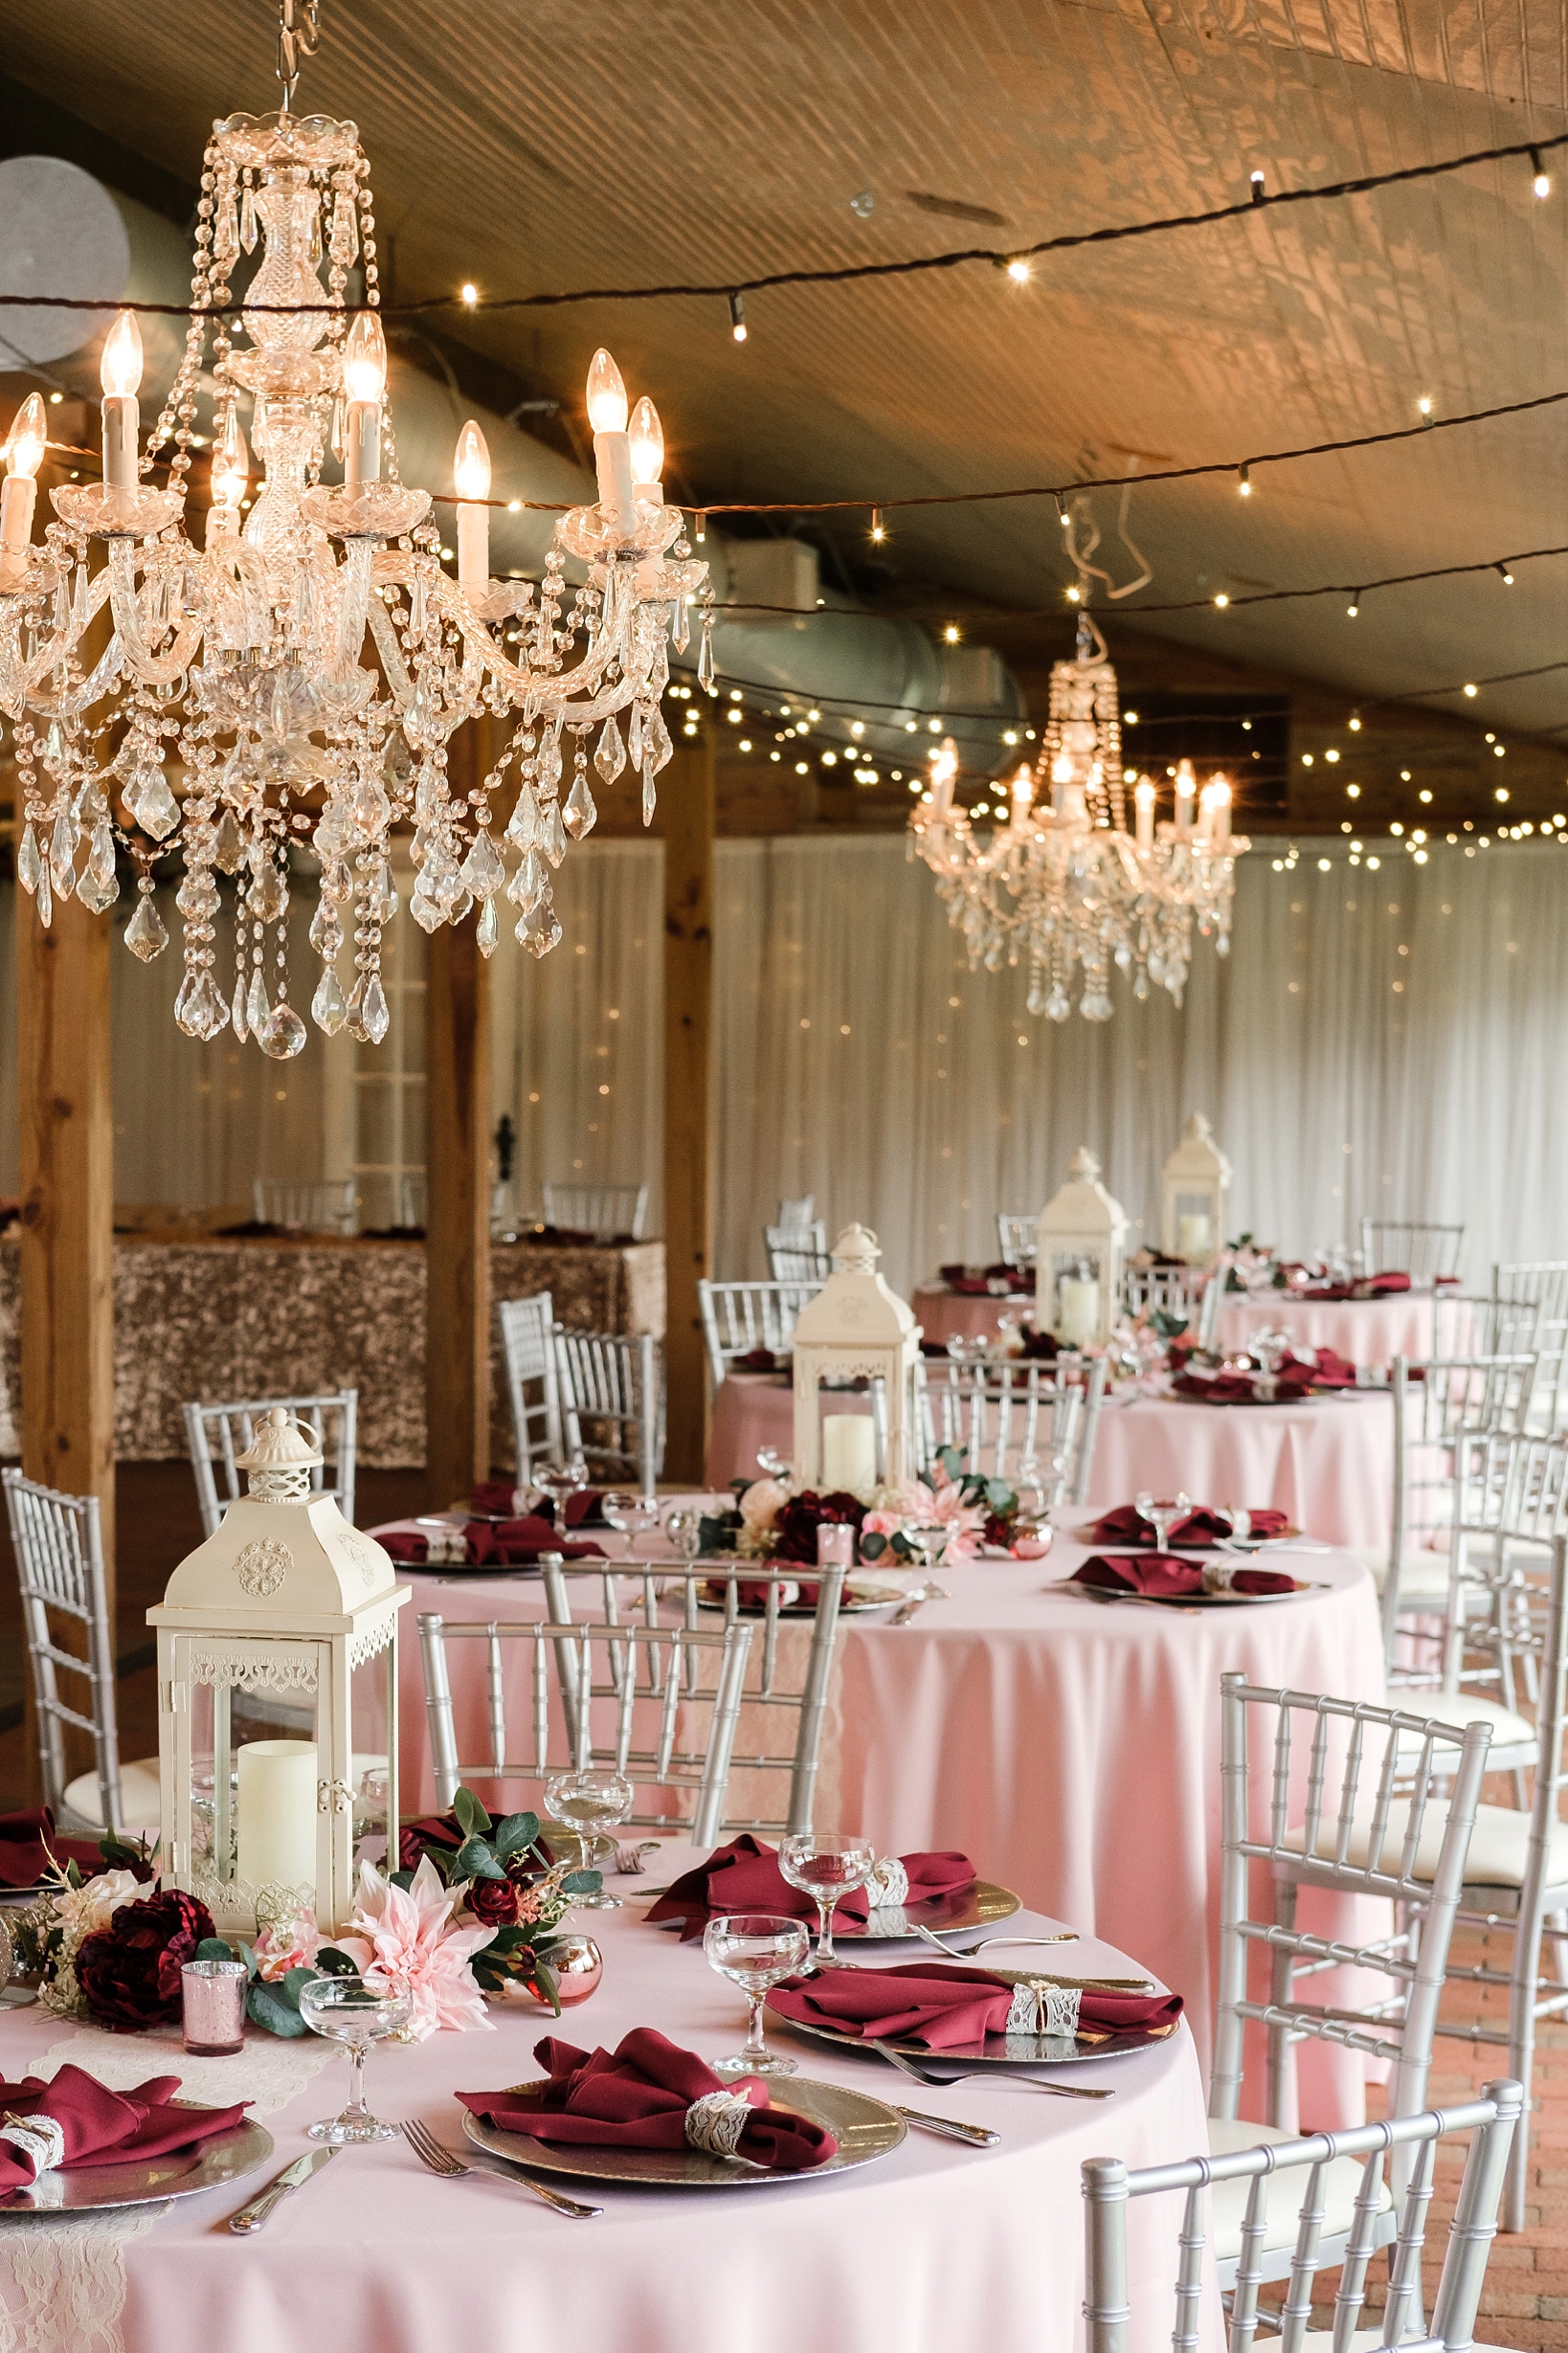 Tables and chandeliers fill the barn reception during this cross creek wedding celebration